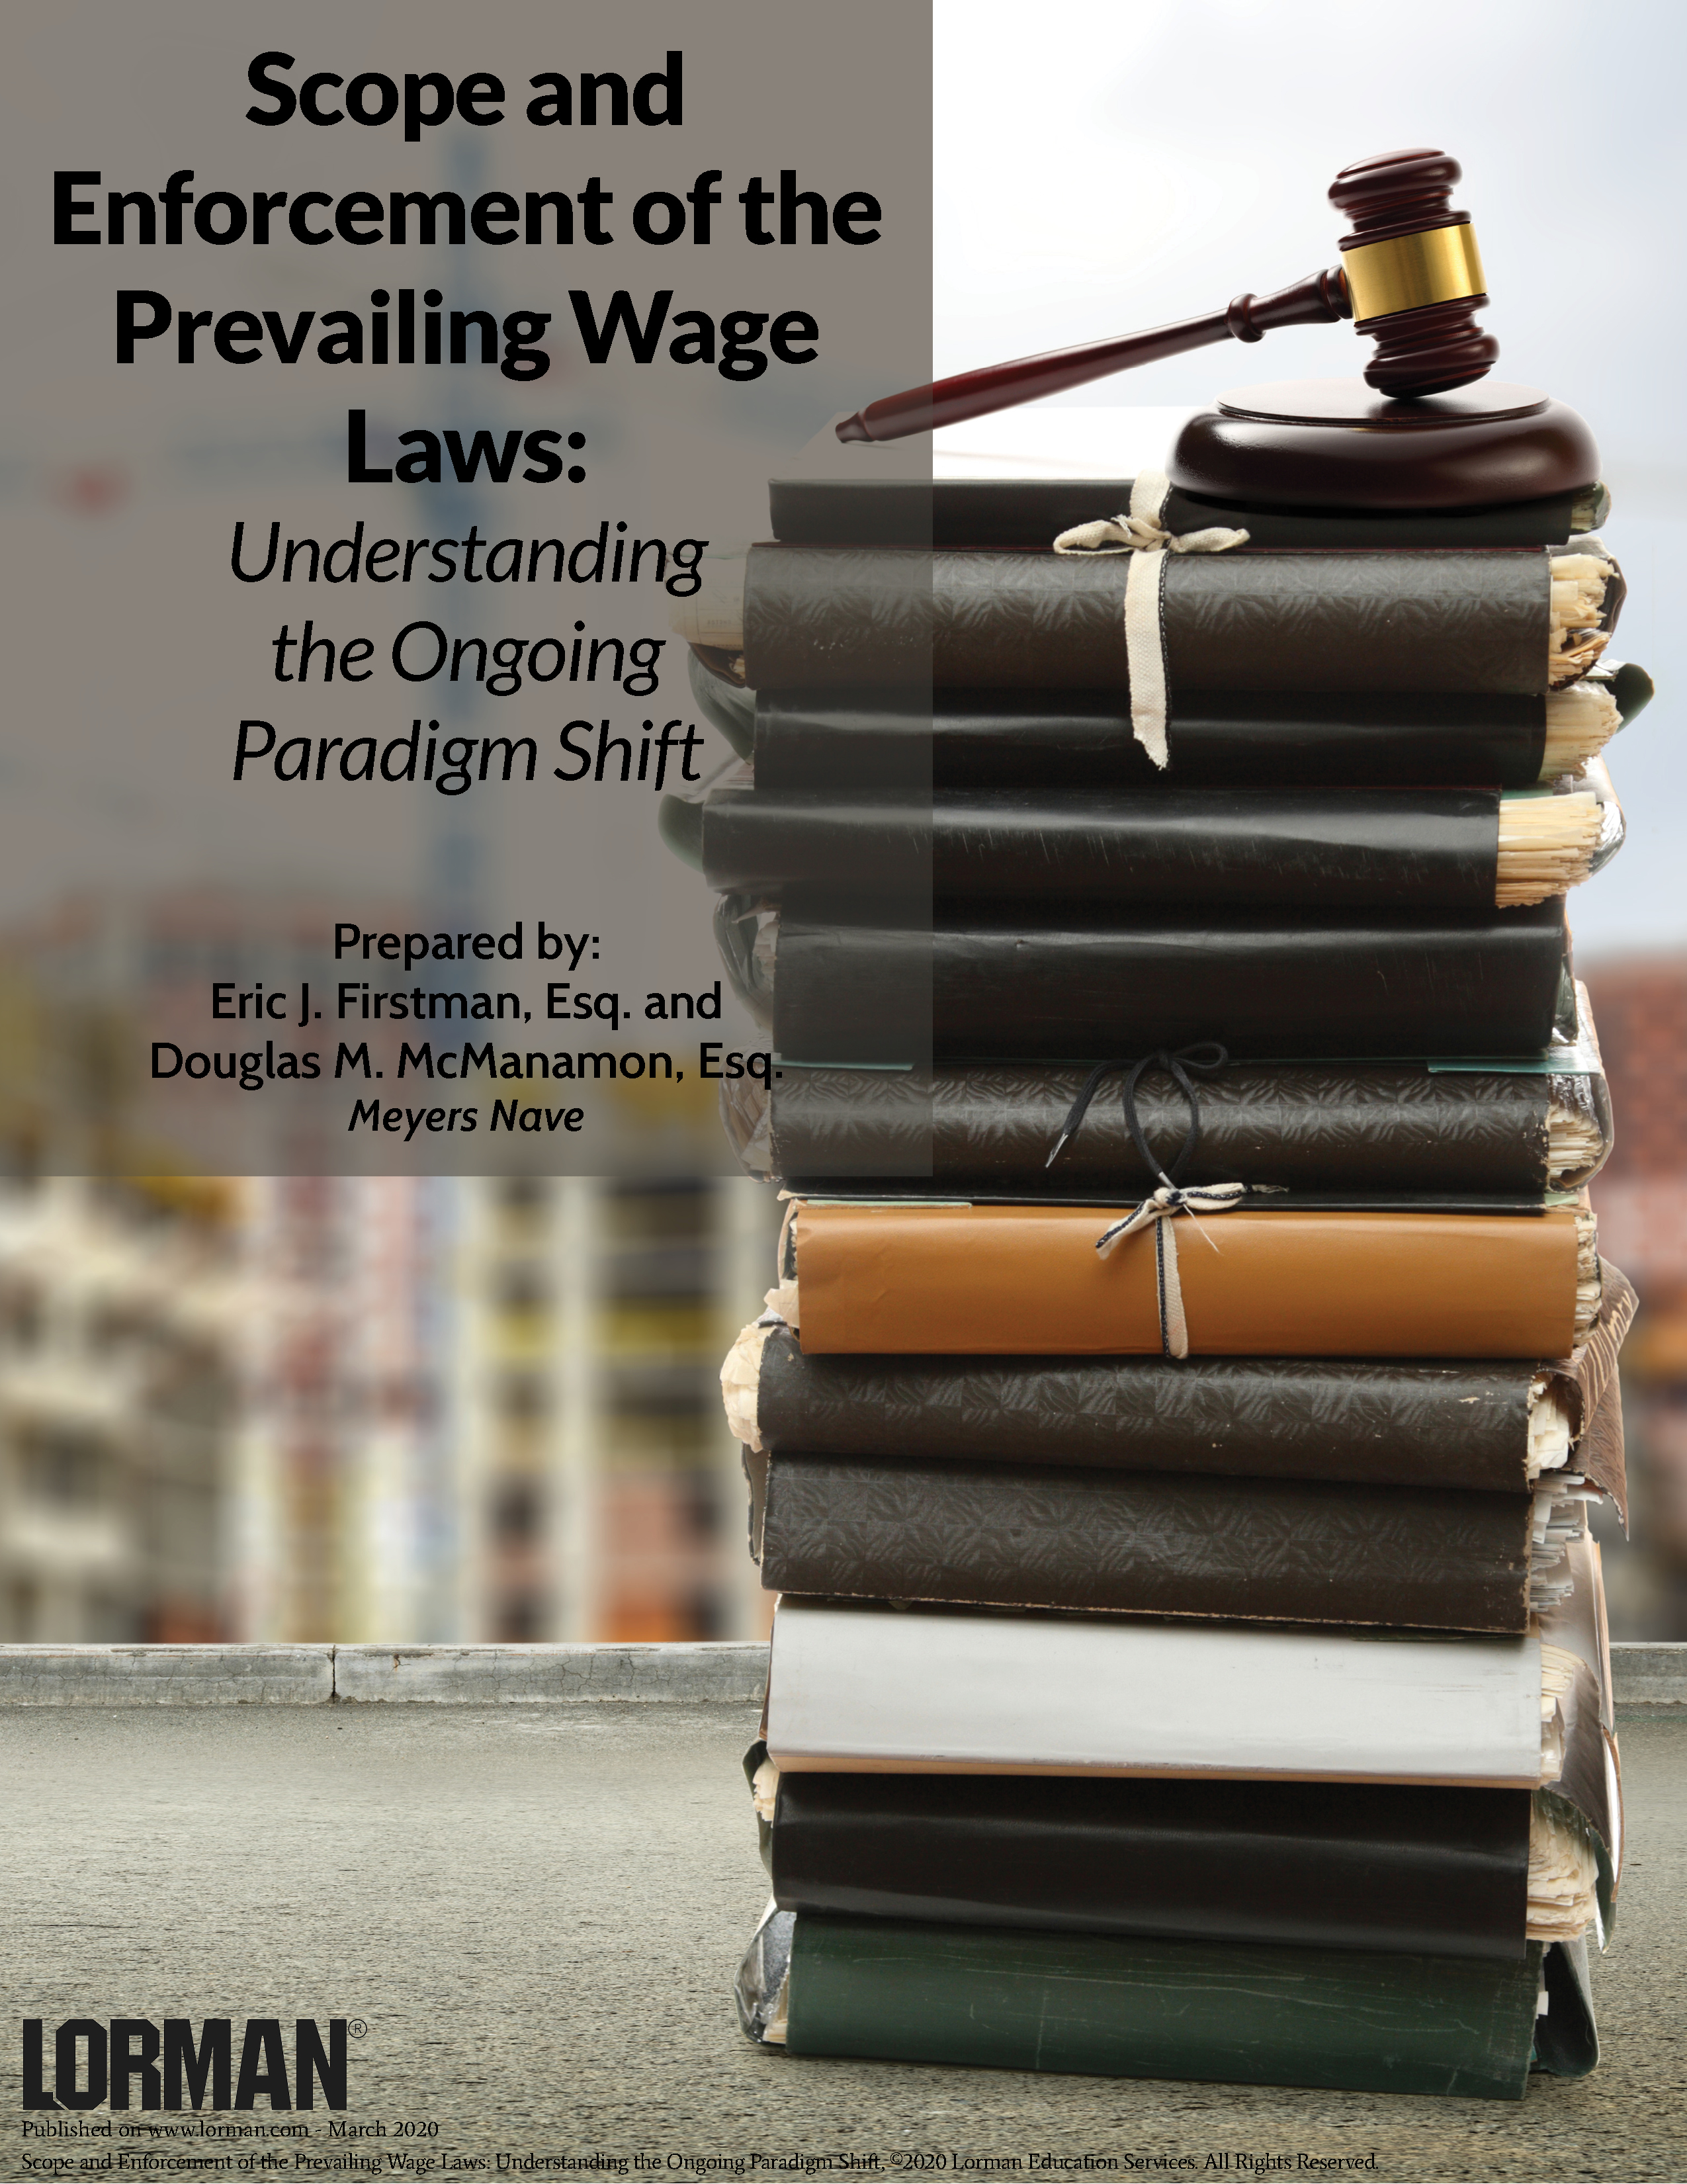 Scope and Enforcement of the Prevailing Wage Laws